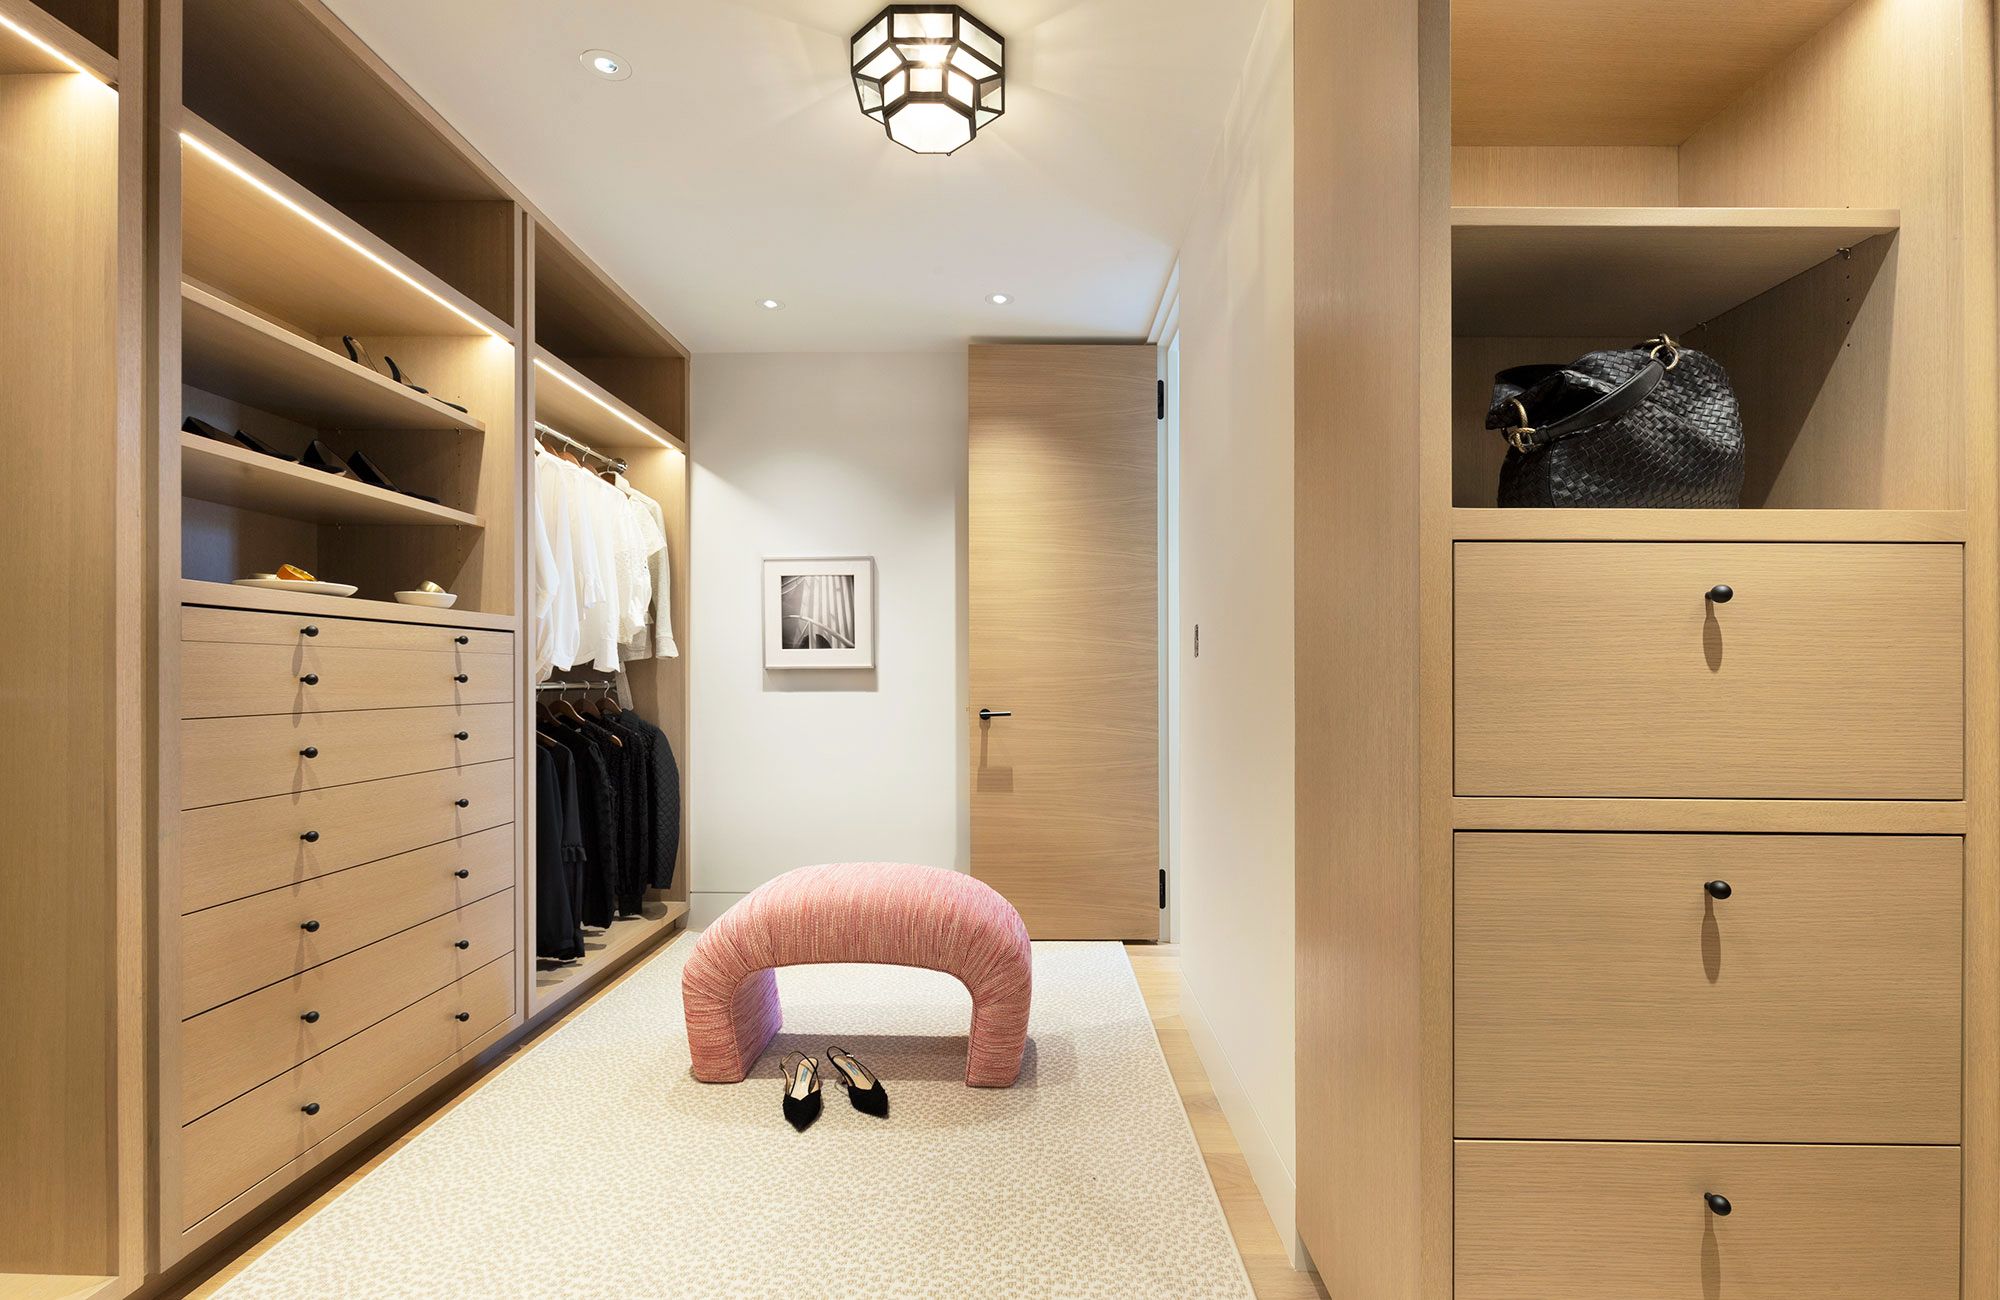 25 Best Walk In Closet Storage Ideas And Designs For Master Bedrooms,Somethings Gotta Give House Plan